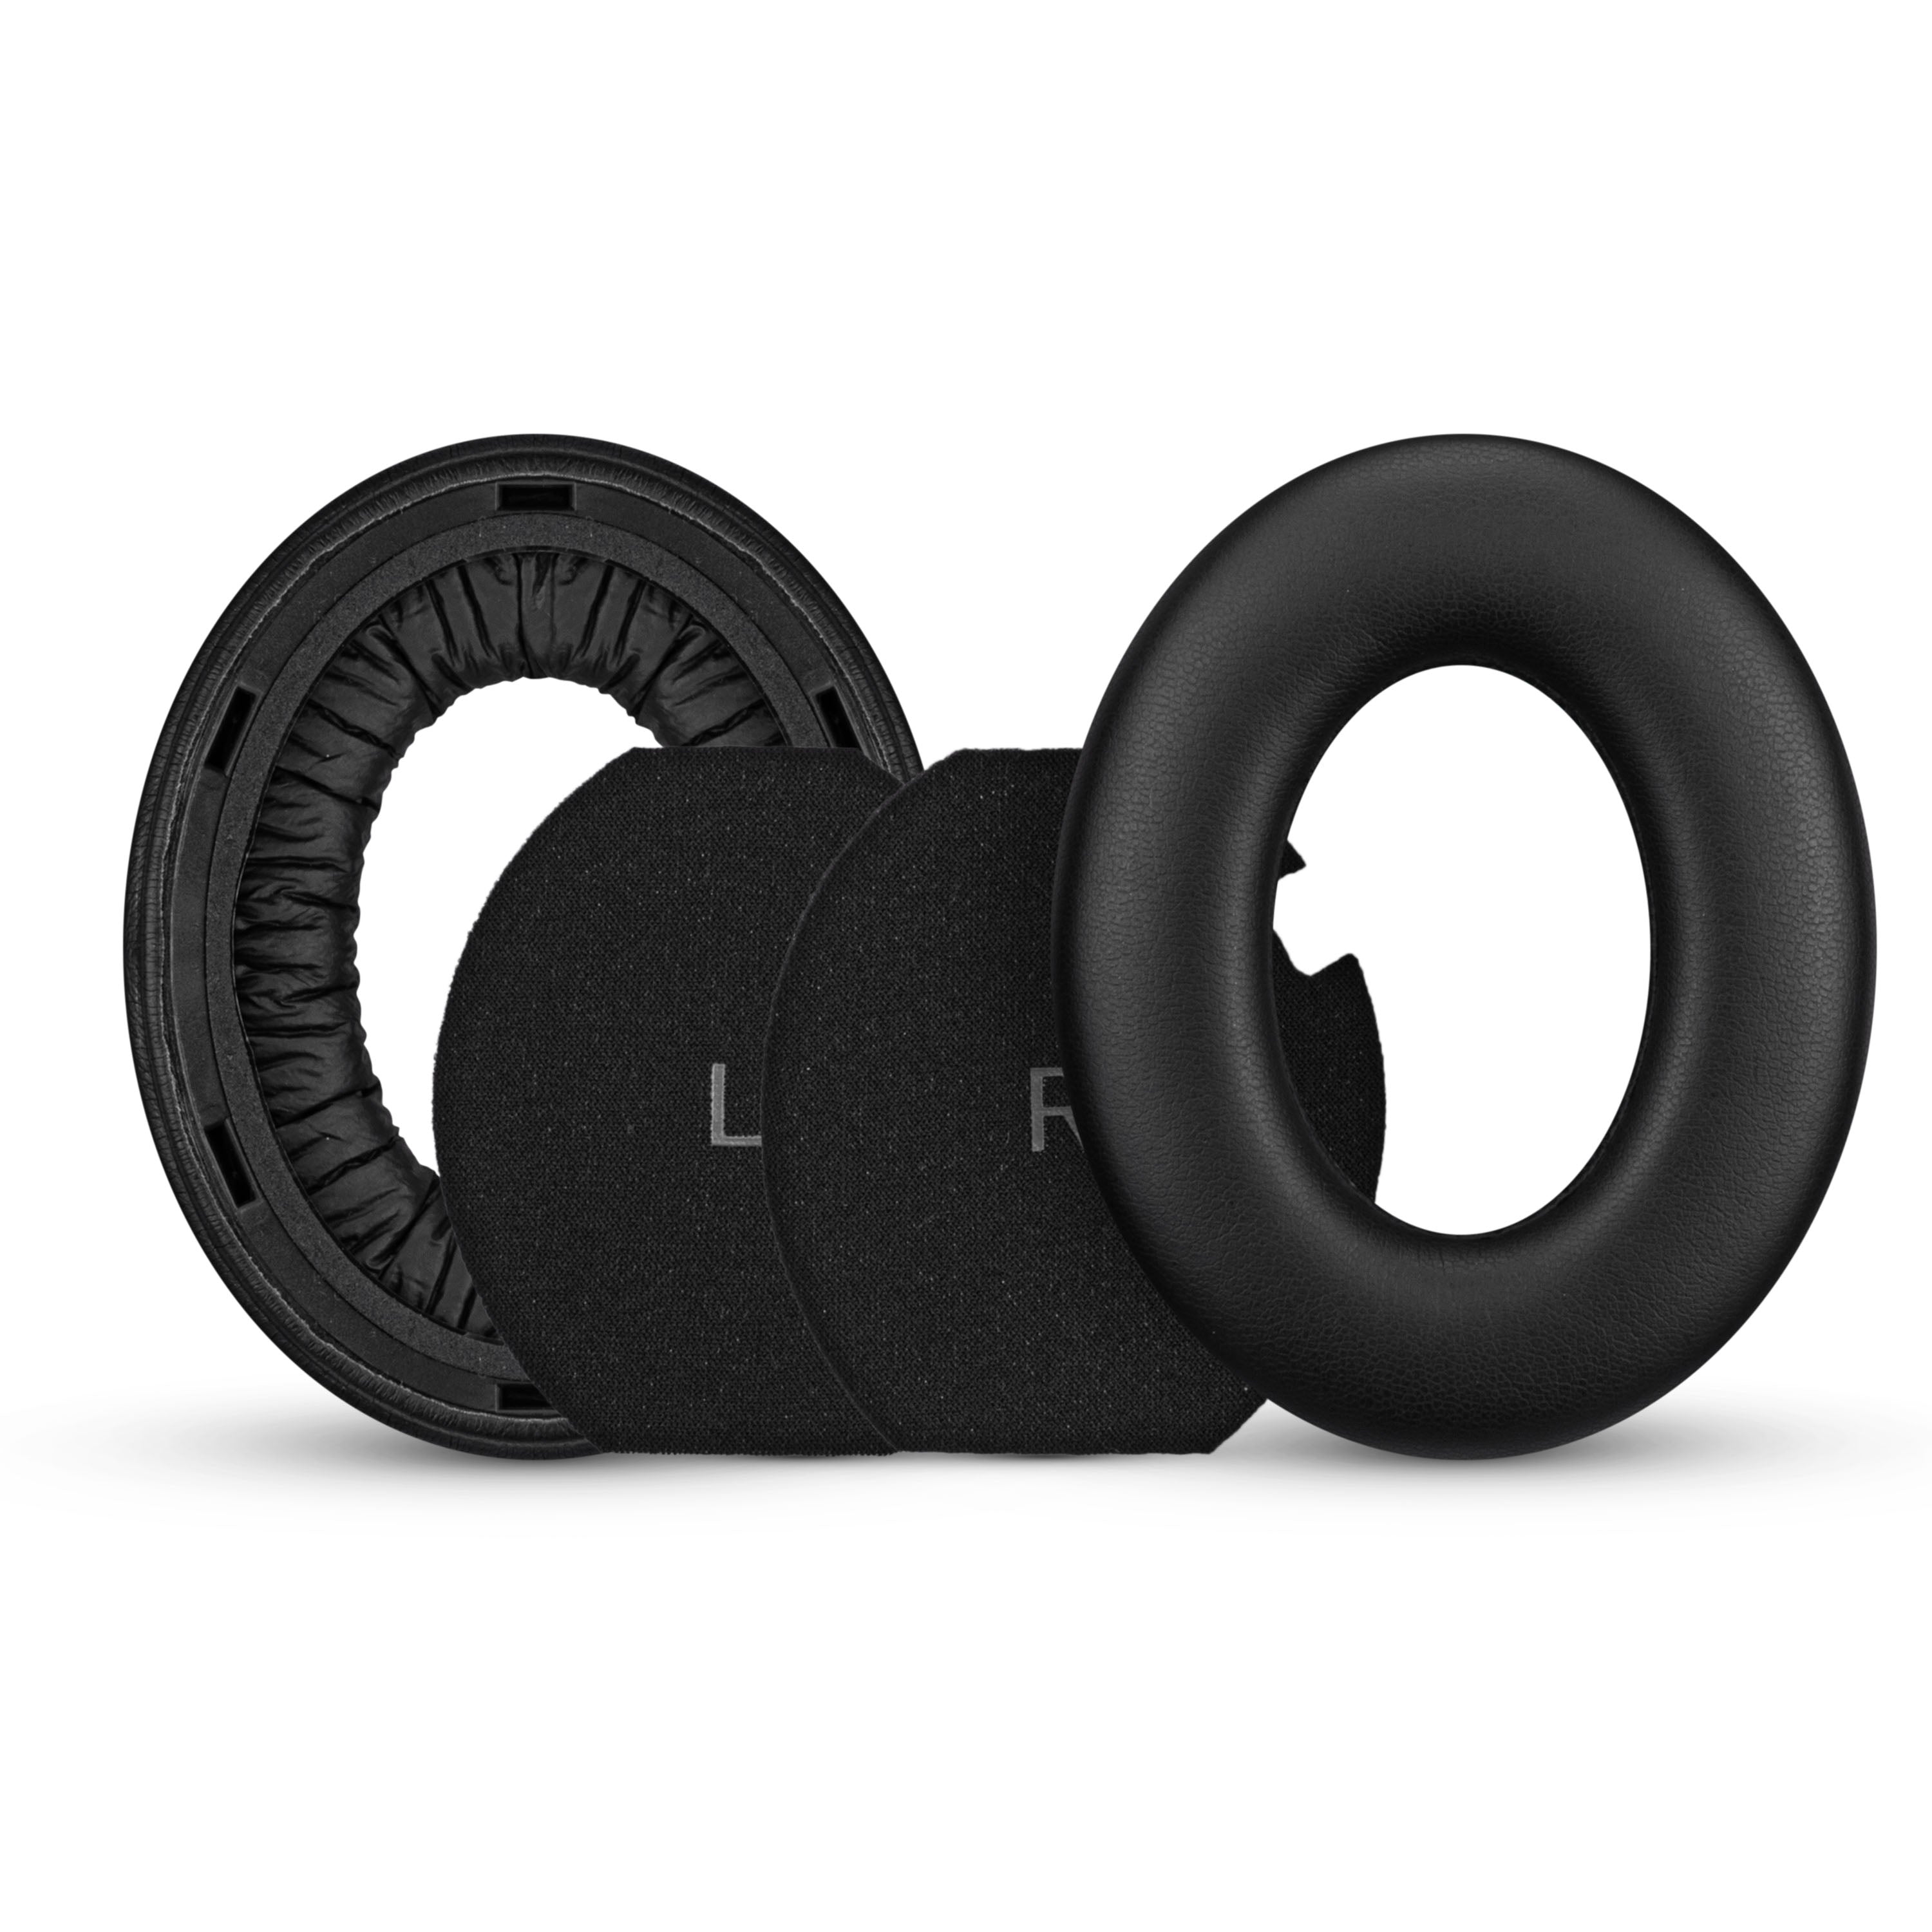 Official Replacement Ear Pads for Momentum 4 Wireless Headphones